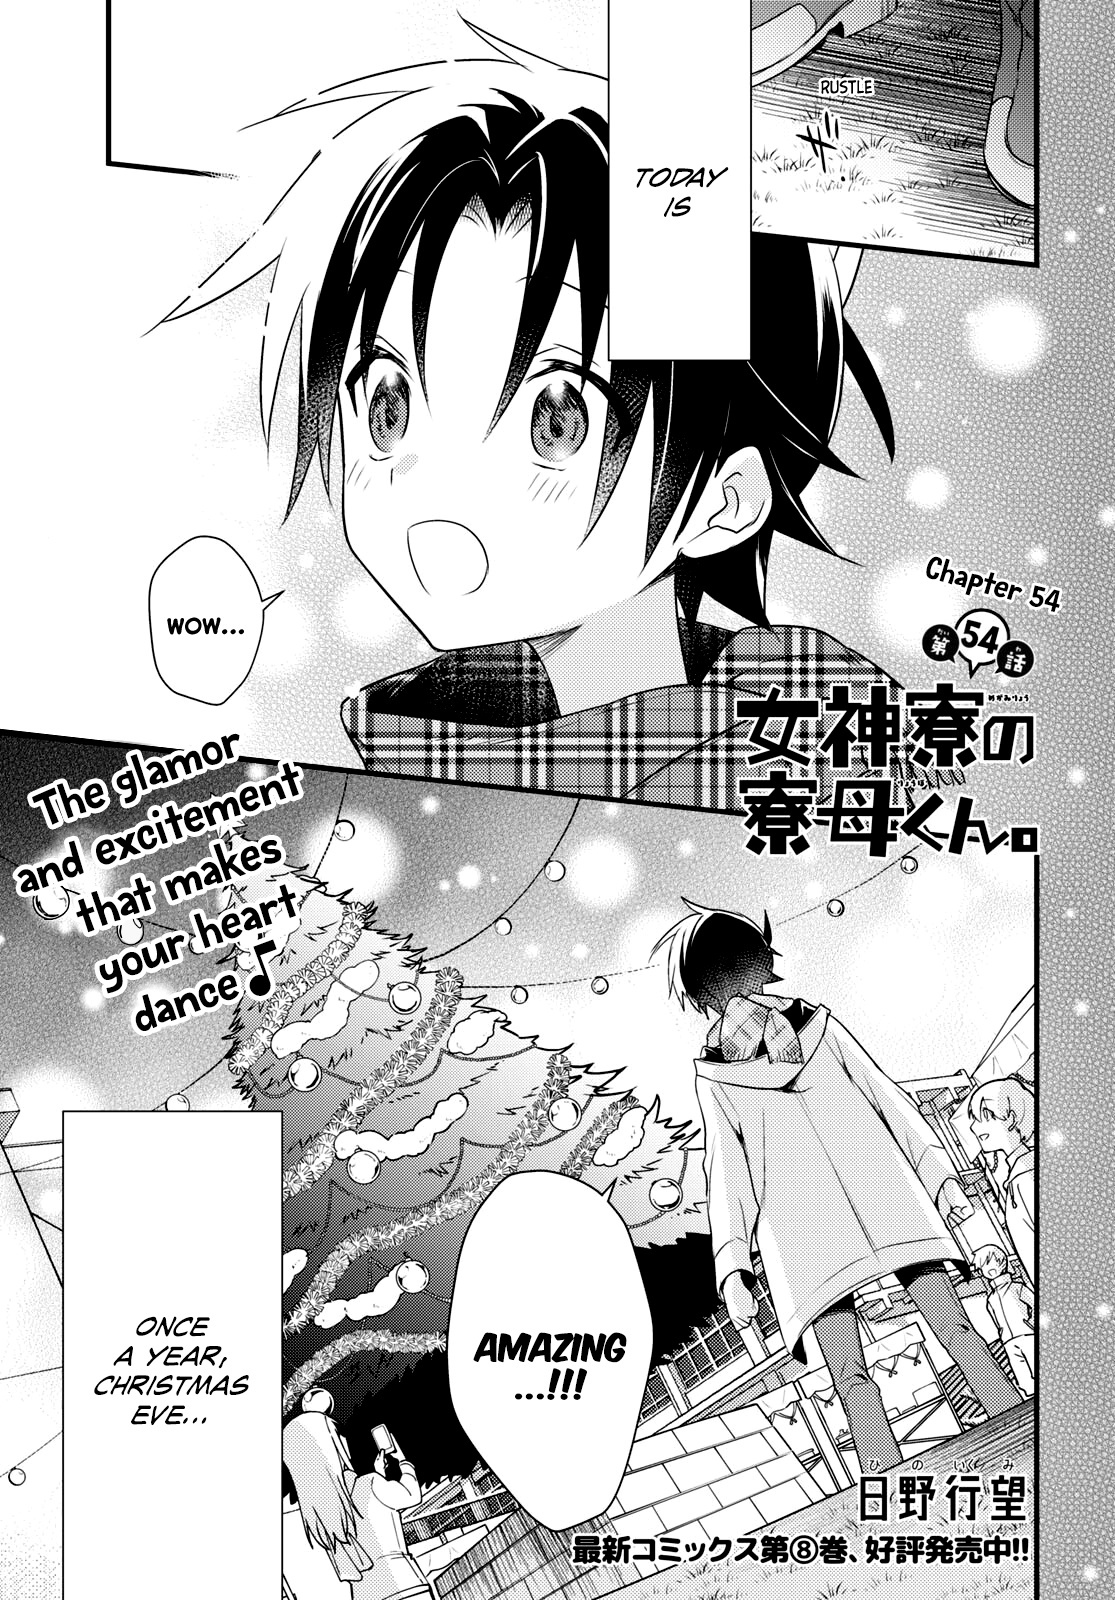 Megami-Ryou No Ryoubo-Kun. Vol.9 Chapter 54 - Picture 1